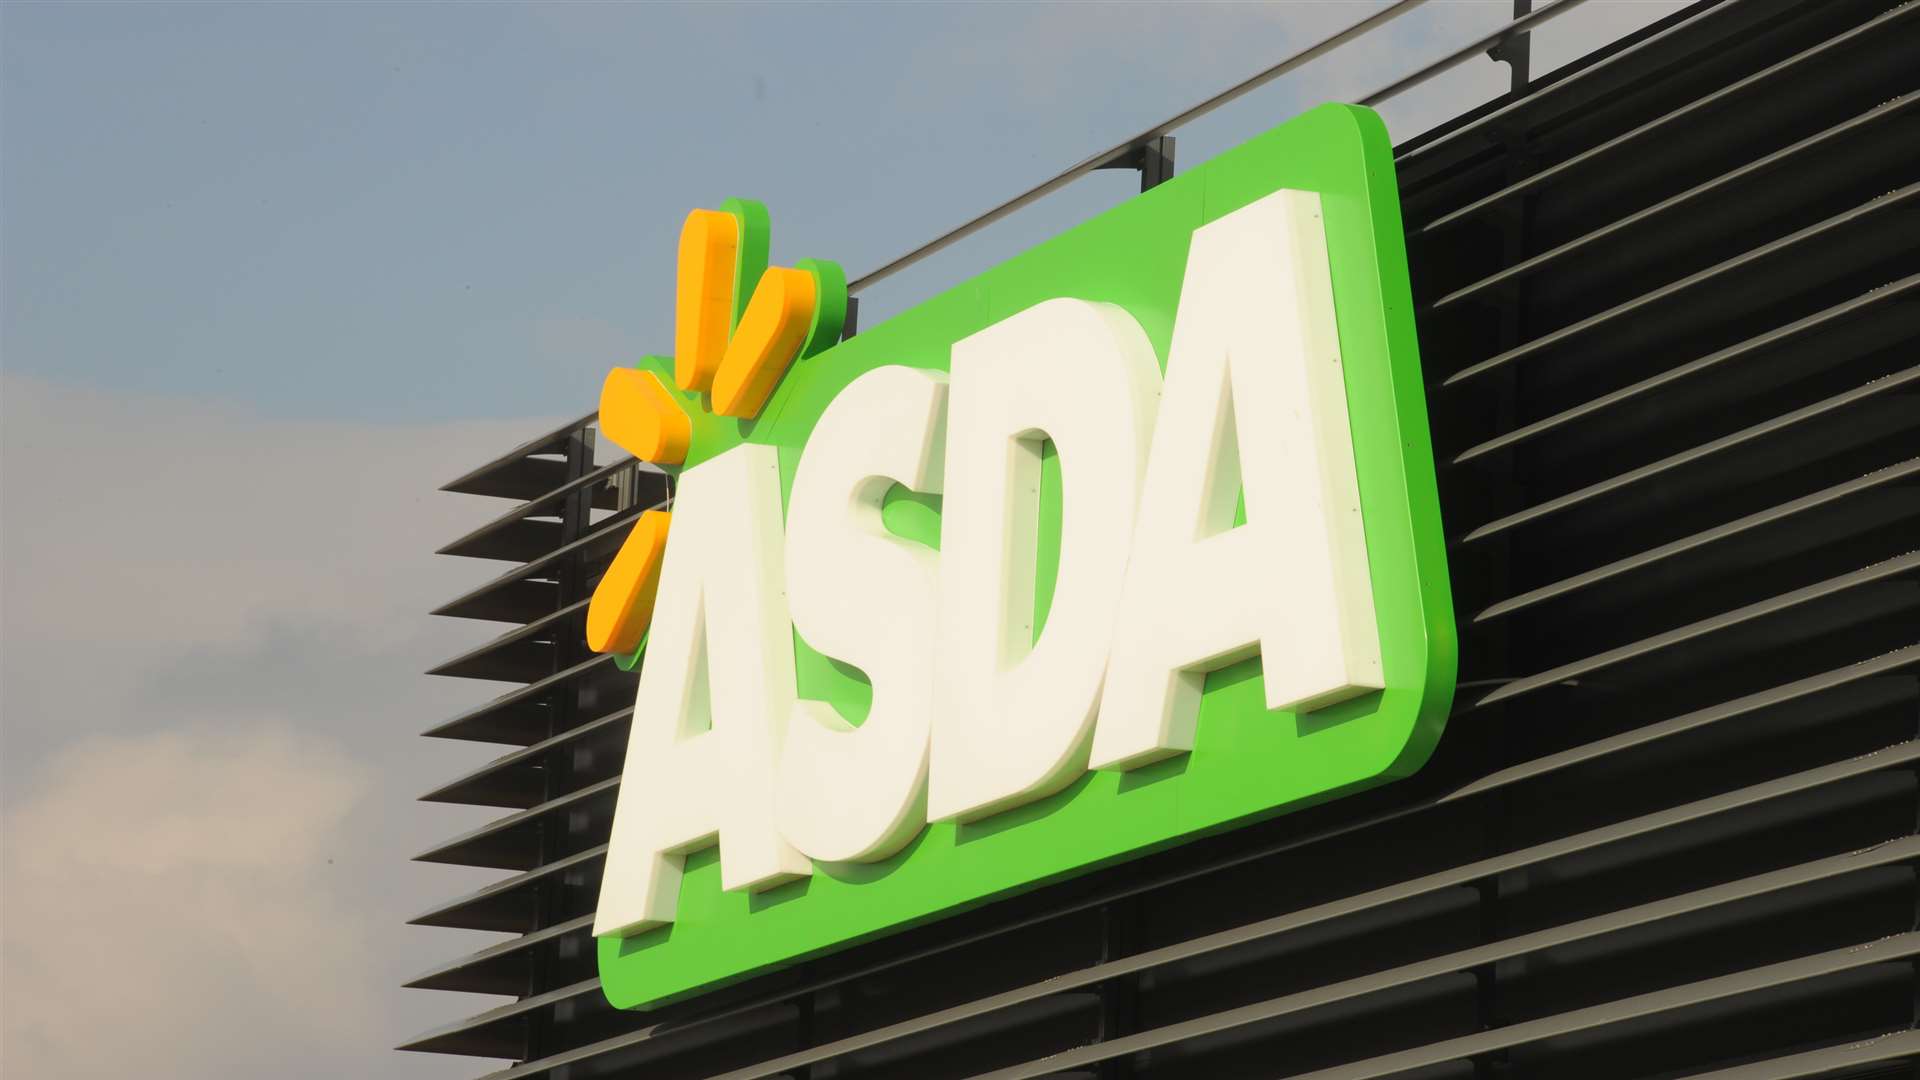 Asda bosses say they have no current plans for the town